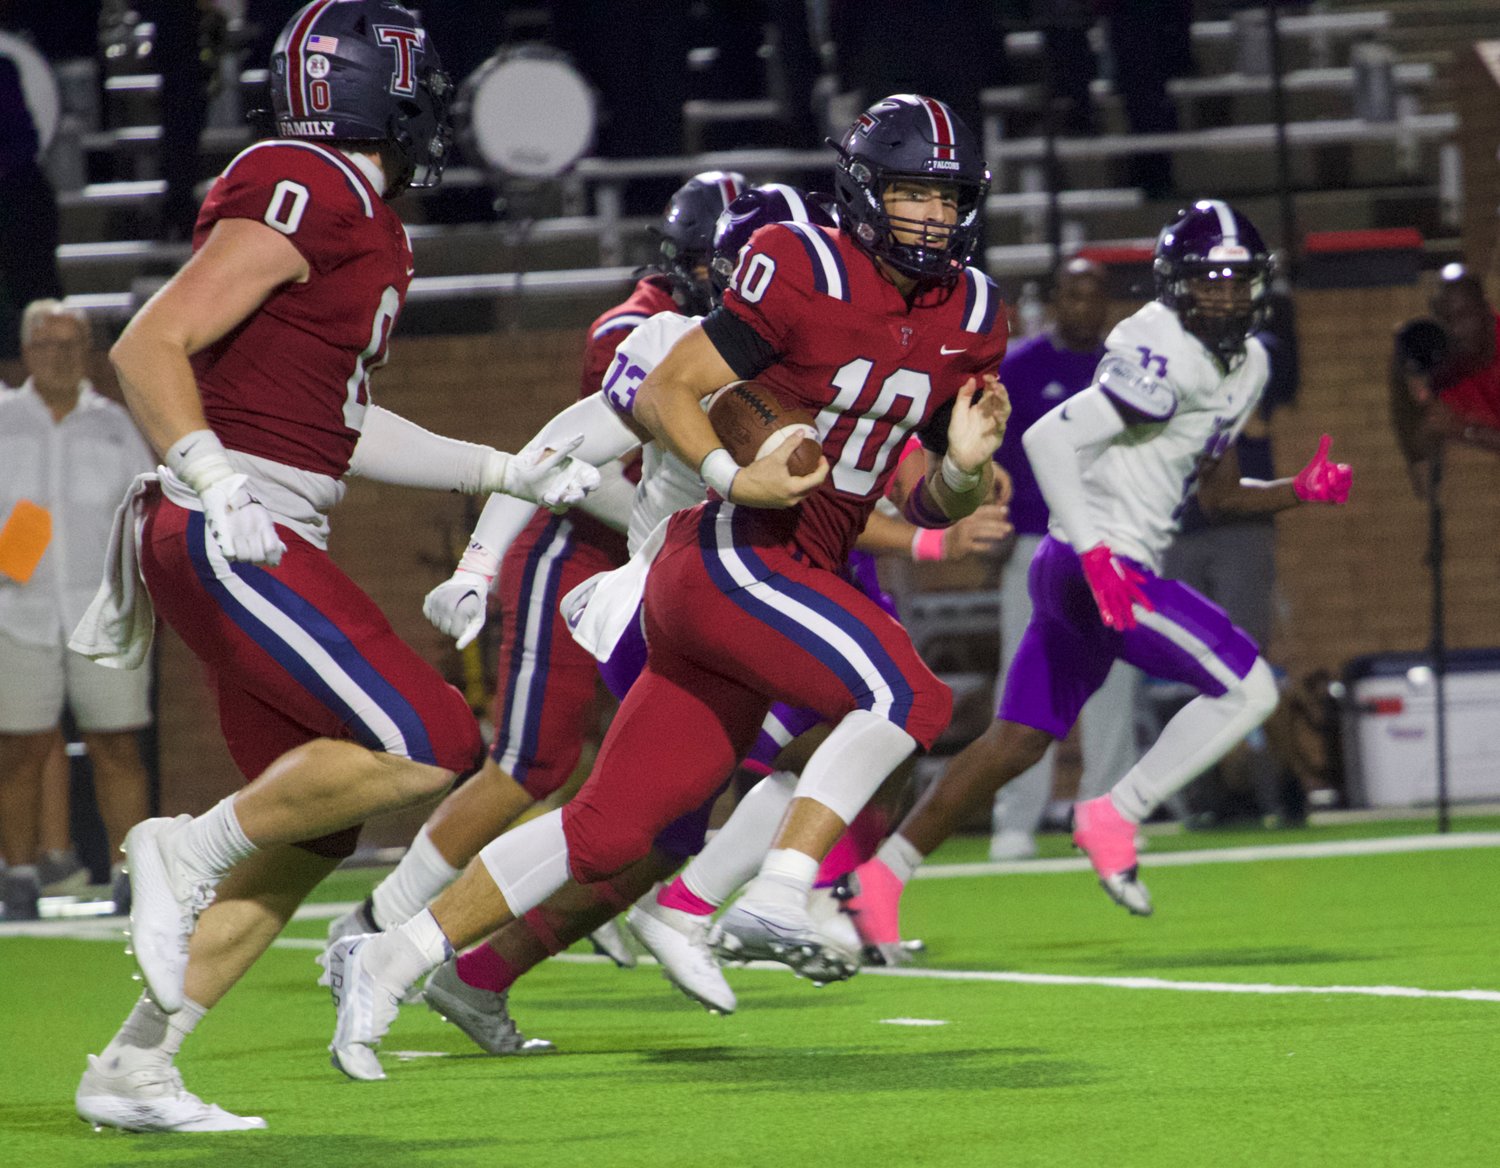 Wyatt Young runs downfield during Thursday's game between Tompkins and Morton Ranch at Rhodes Stadium.